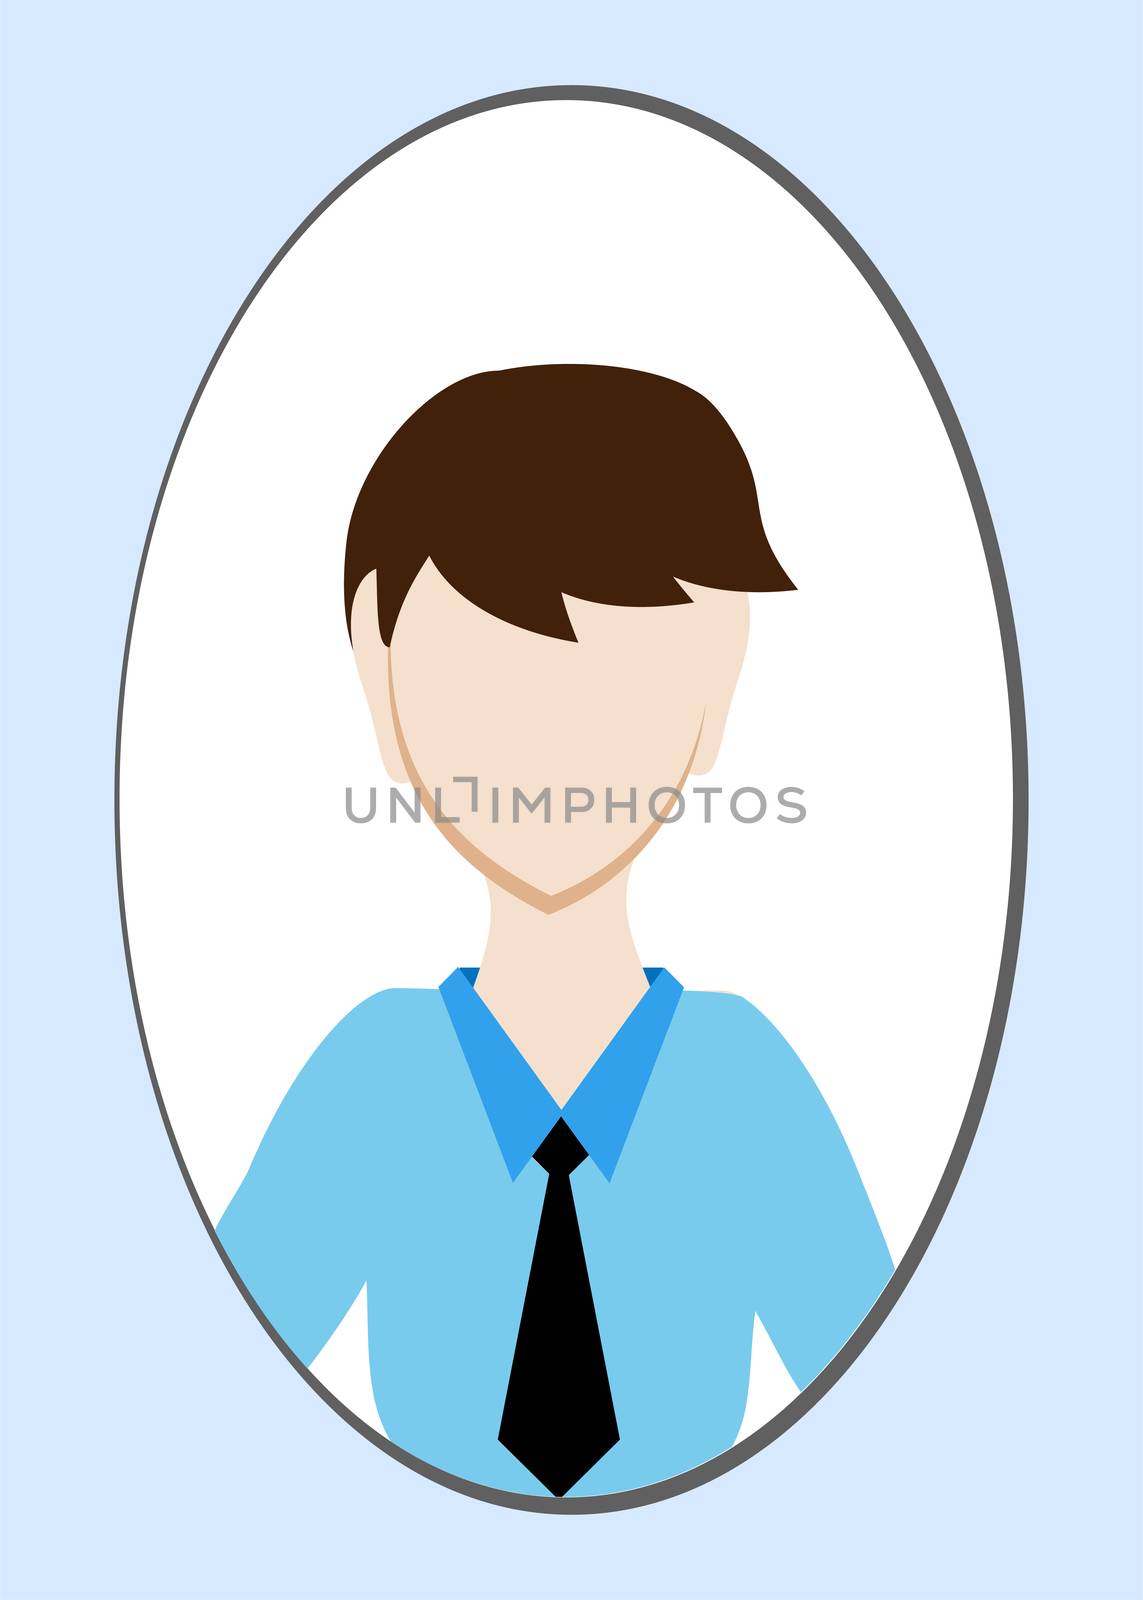 Male avatar or pictogram for social networks. Modern flat colorful style. illustration